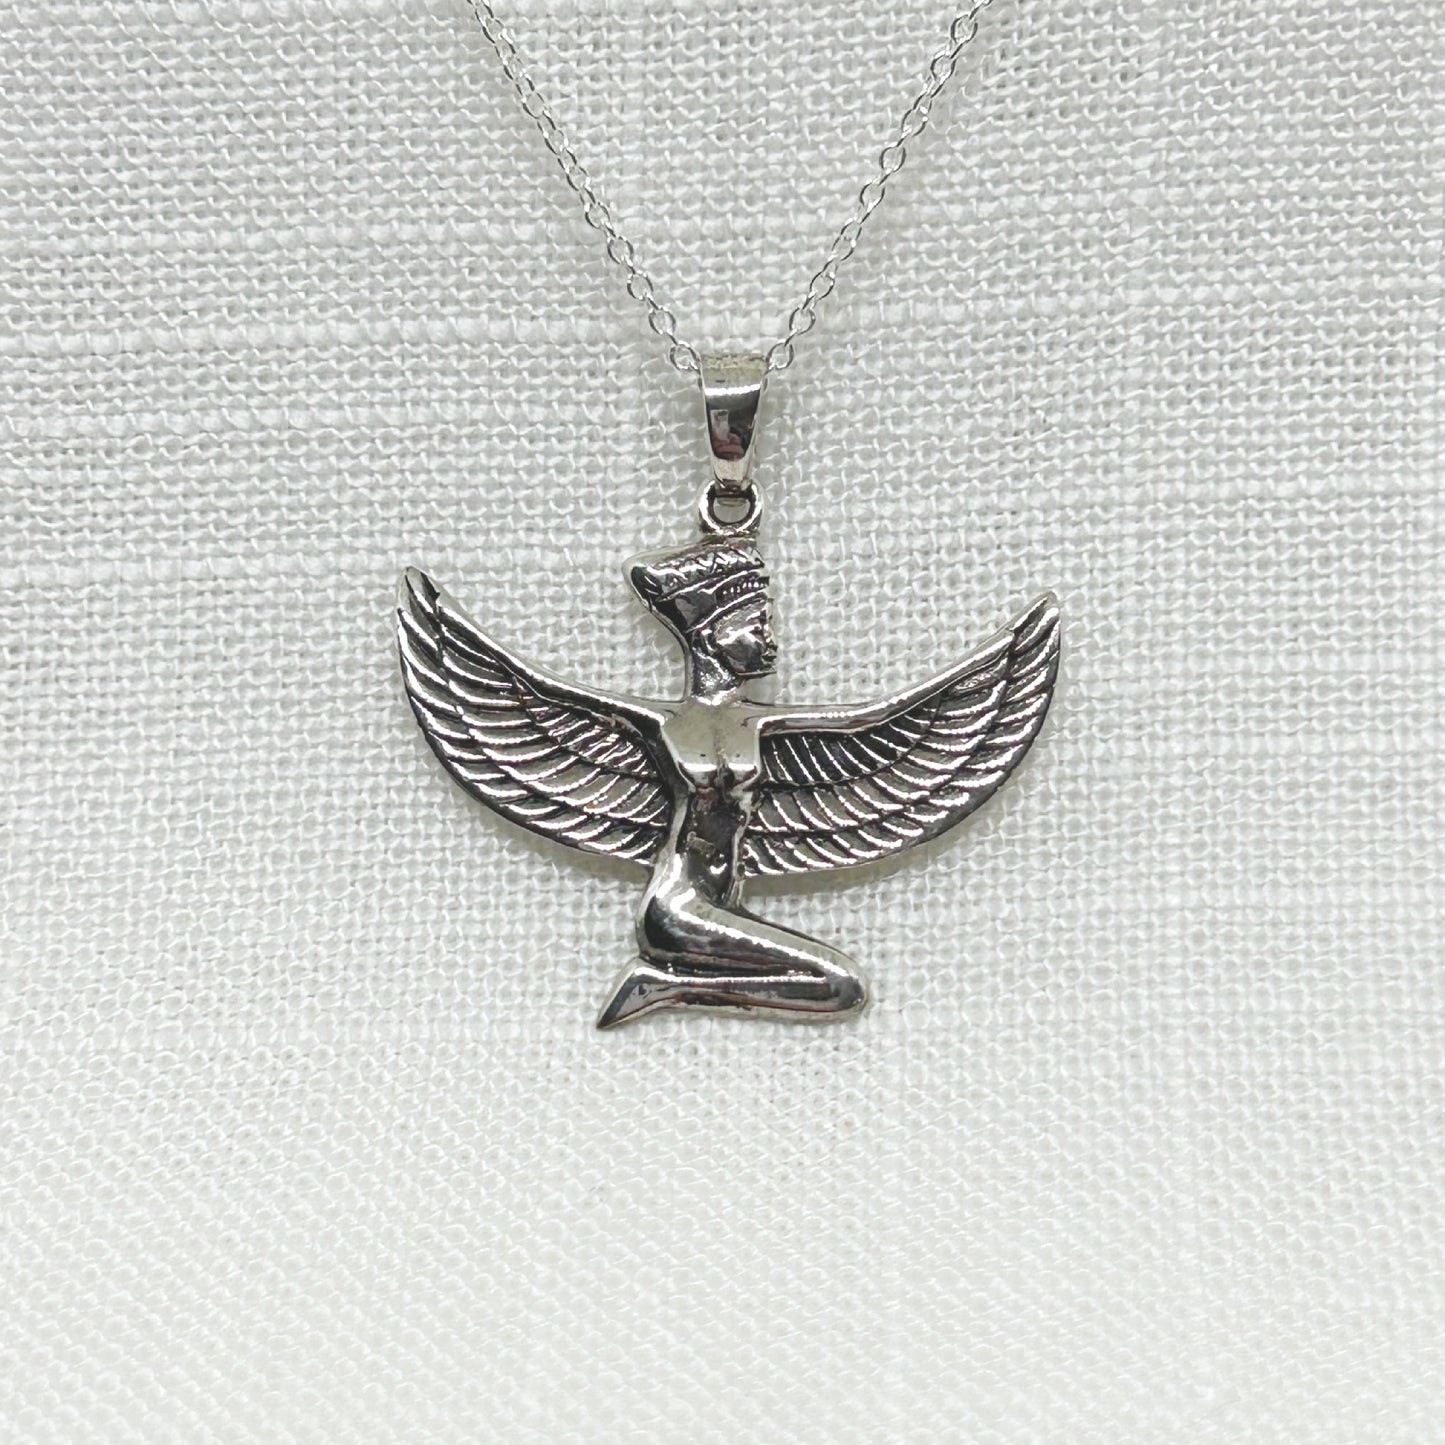 Set in solid 925 silver, this beautiful ancient Egyptian Goddess Isis is kneeling with detailed wings that spread 3cm wide. She is 3cm high including the bale.  All pendants come supplied on a 20 inch Sterling Silver Curb Chain and arrive gift boxed.   In ancient Egypt, Isis symbolises motherhood, healing, magic, love, death and rebirth.